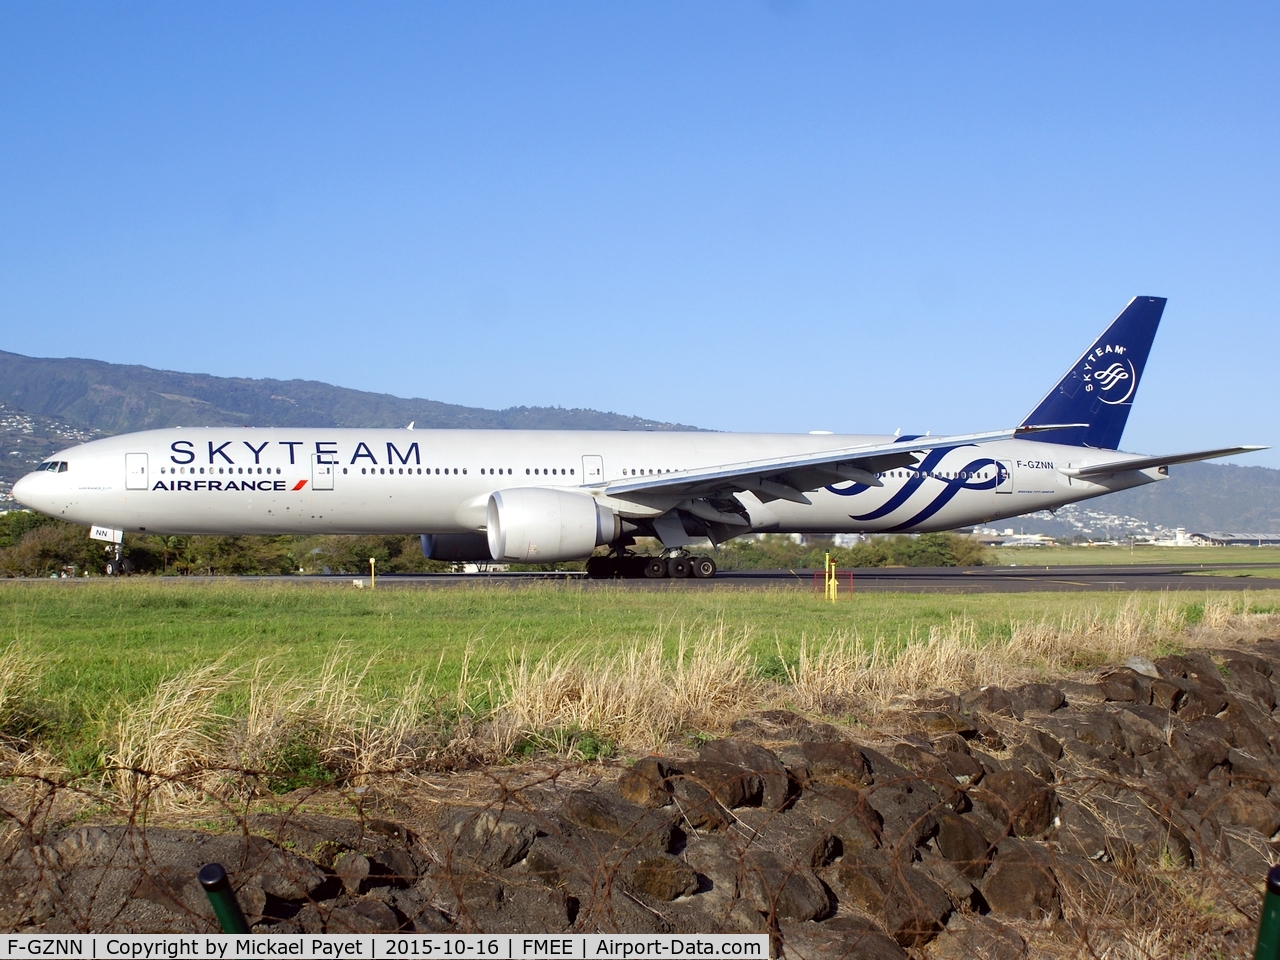 F-GZNN, 2012 Boeing 777-328/ER C/N 40376, Happy to see this one in Reunion island